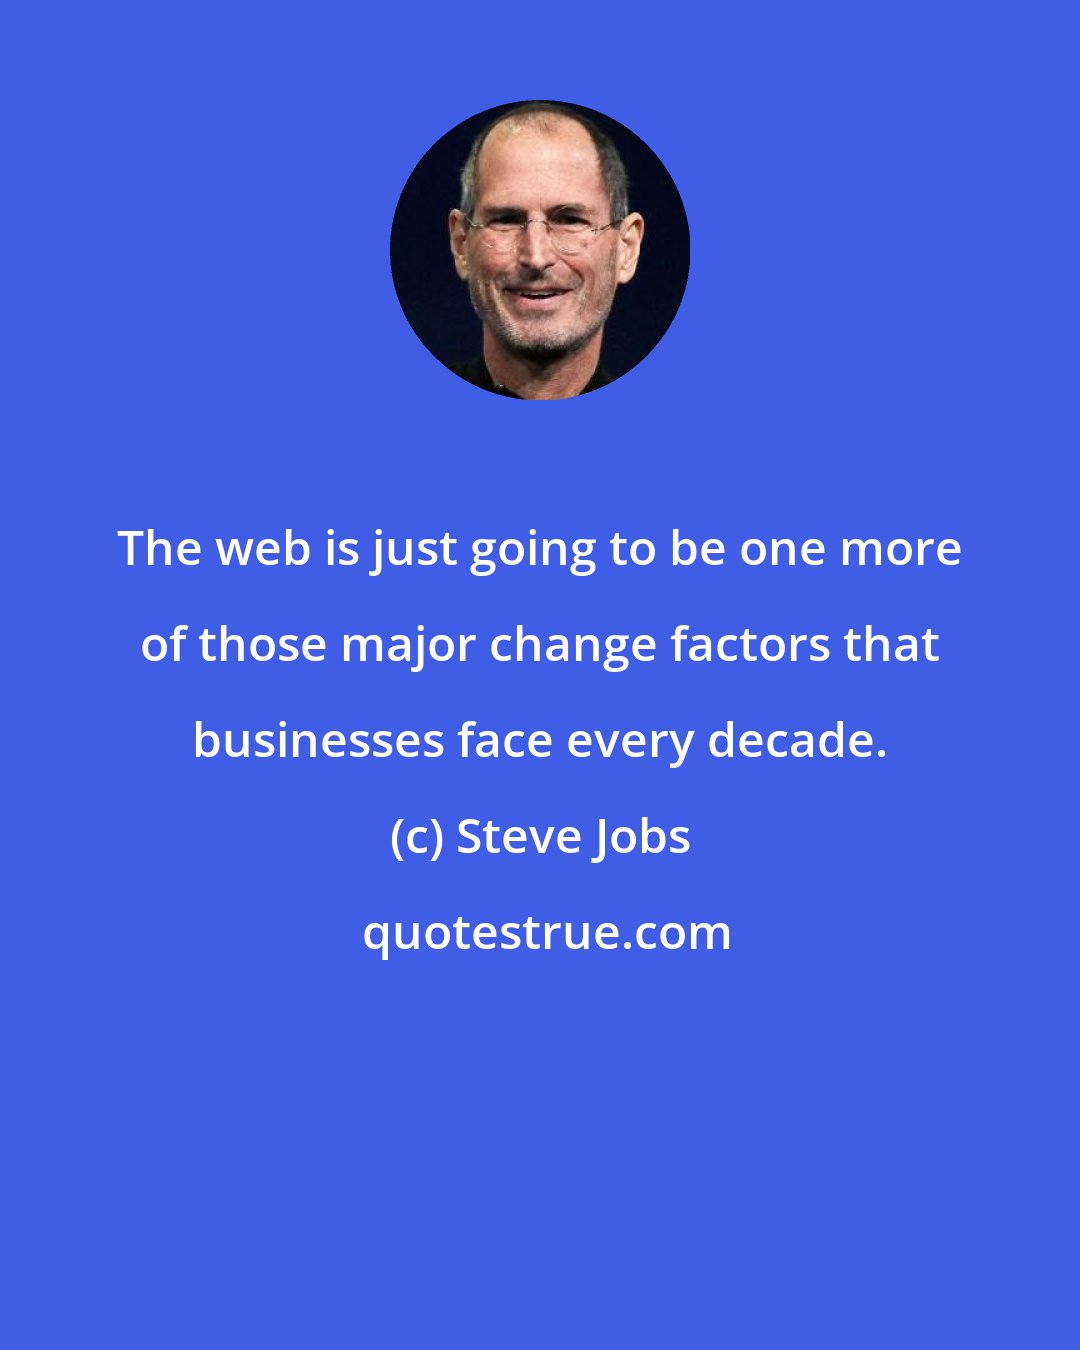 Steve Jobs: The web is just going to be one more of those major change factors that businesses face every decade.